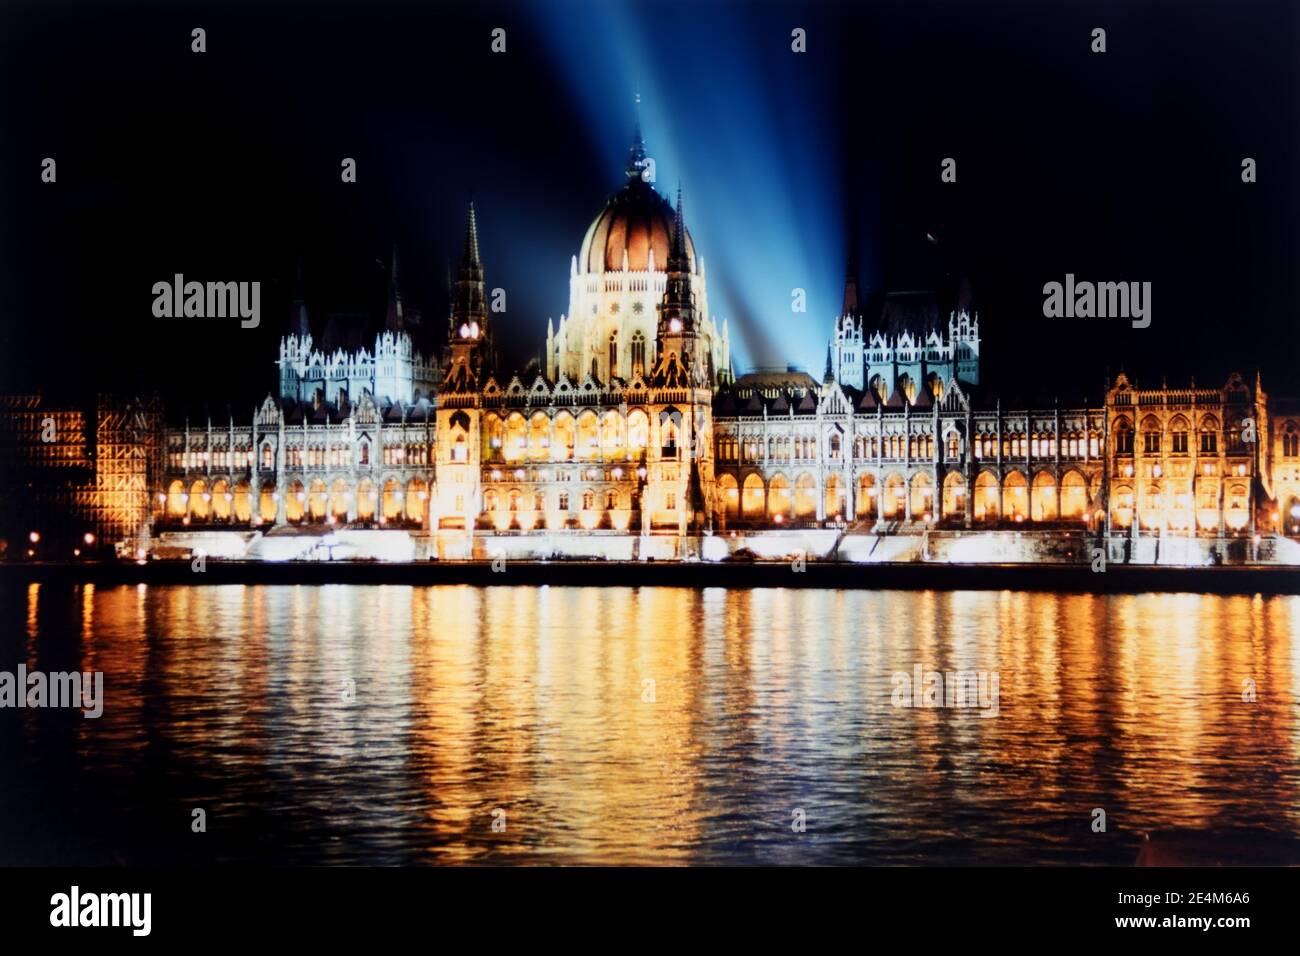 The Hungarian Parliament on the eve of the Millenium, Budapest Stock Photo